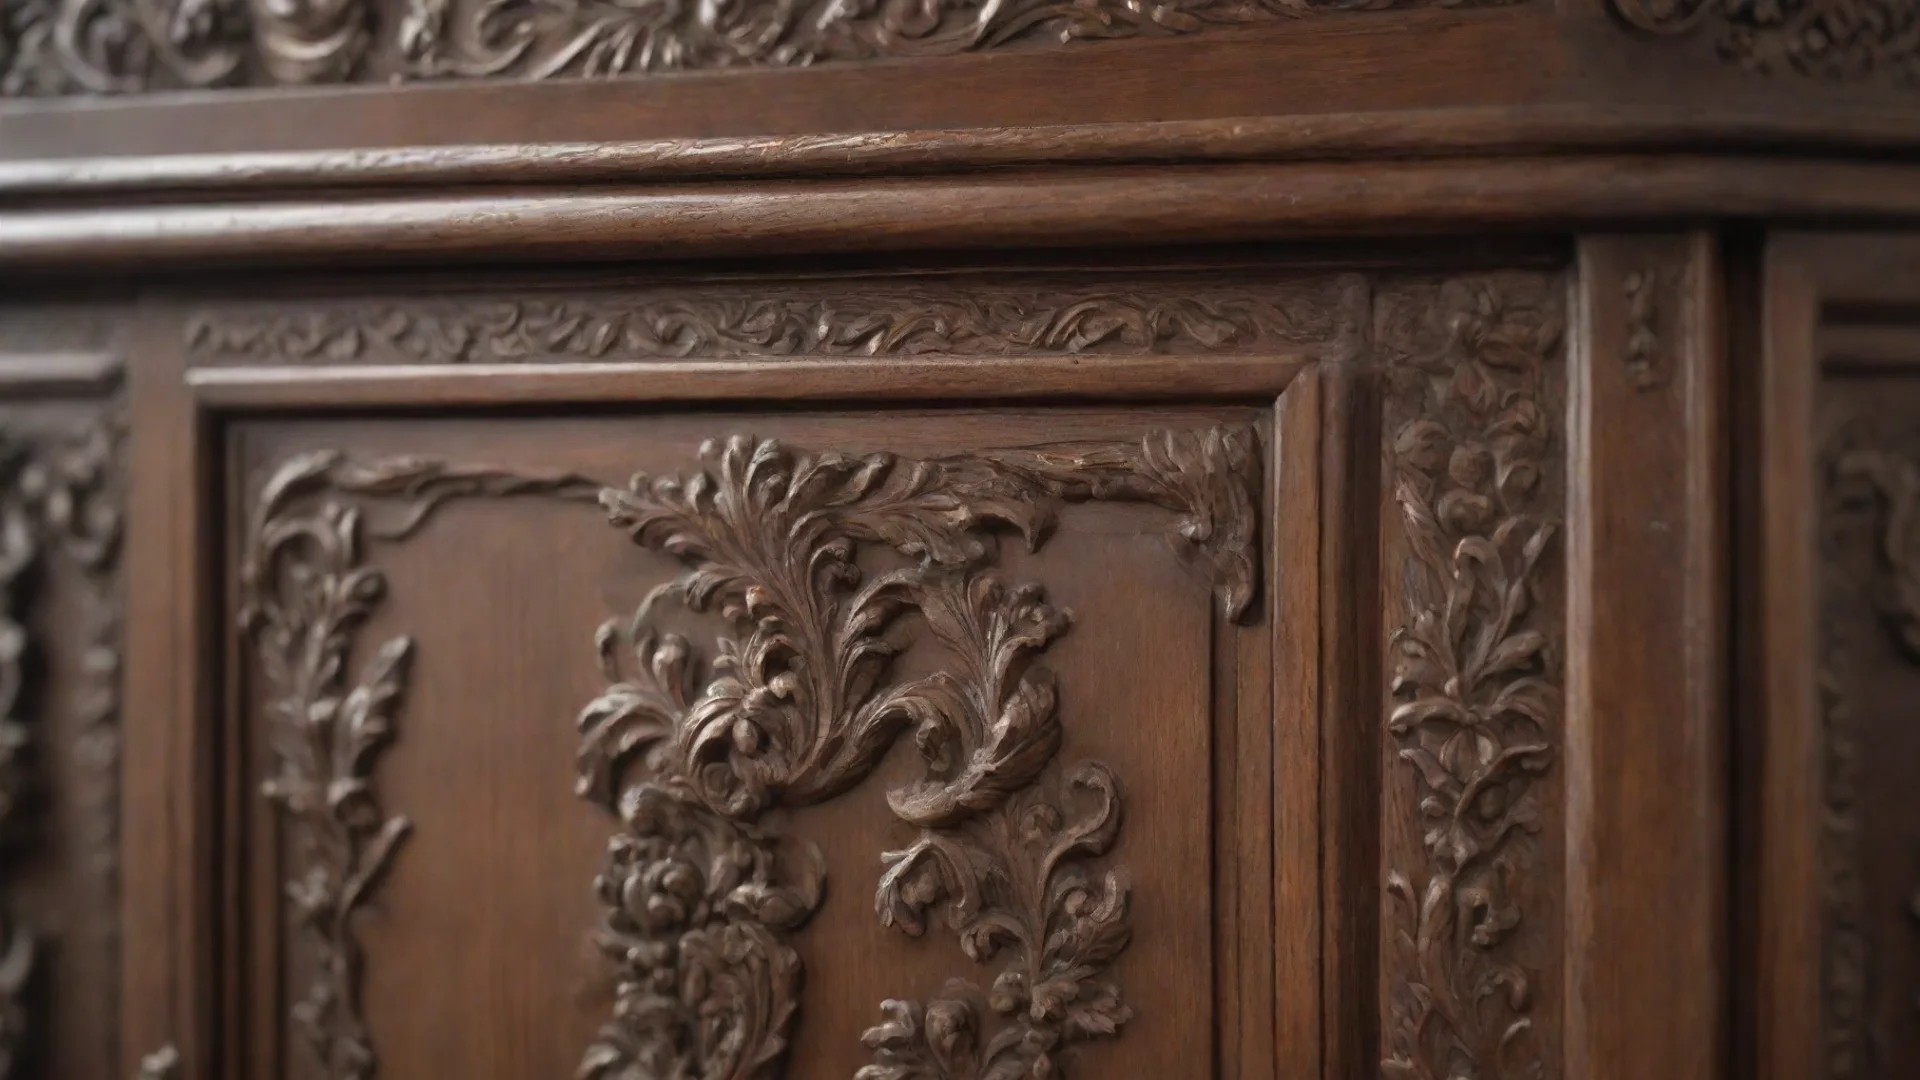 artstation art detail view of an ornate wooden cabinet dark brown at the edge blurred with high craftsmanship confident engaging wow 3 hdwidescreen